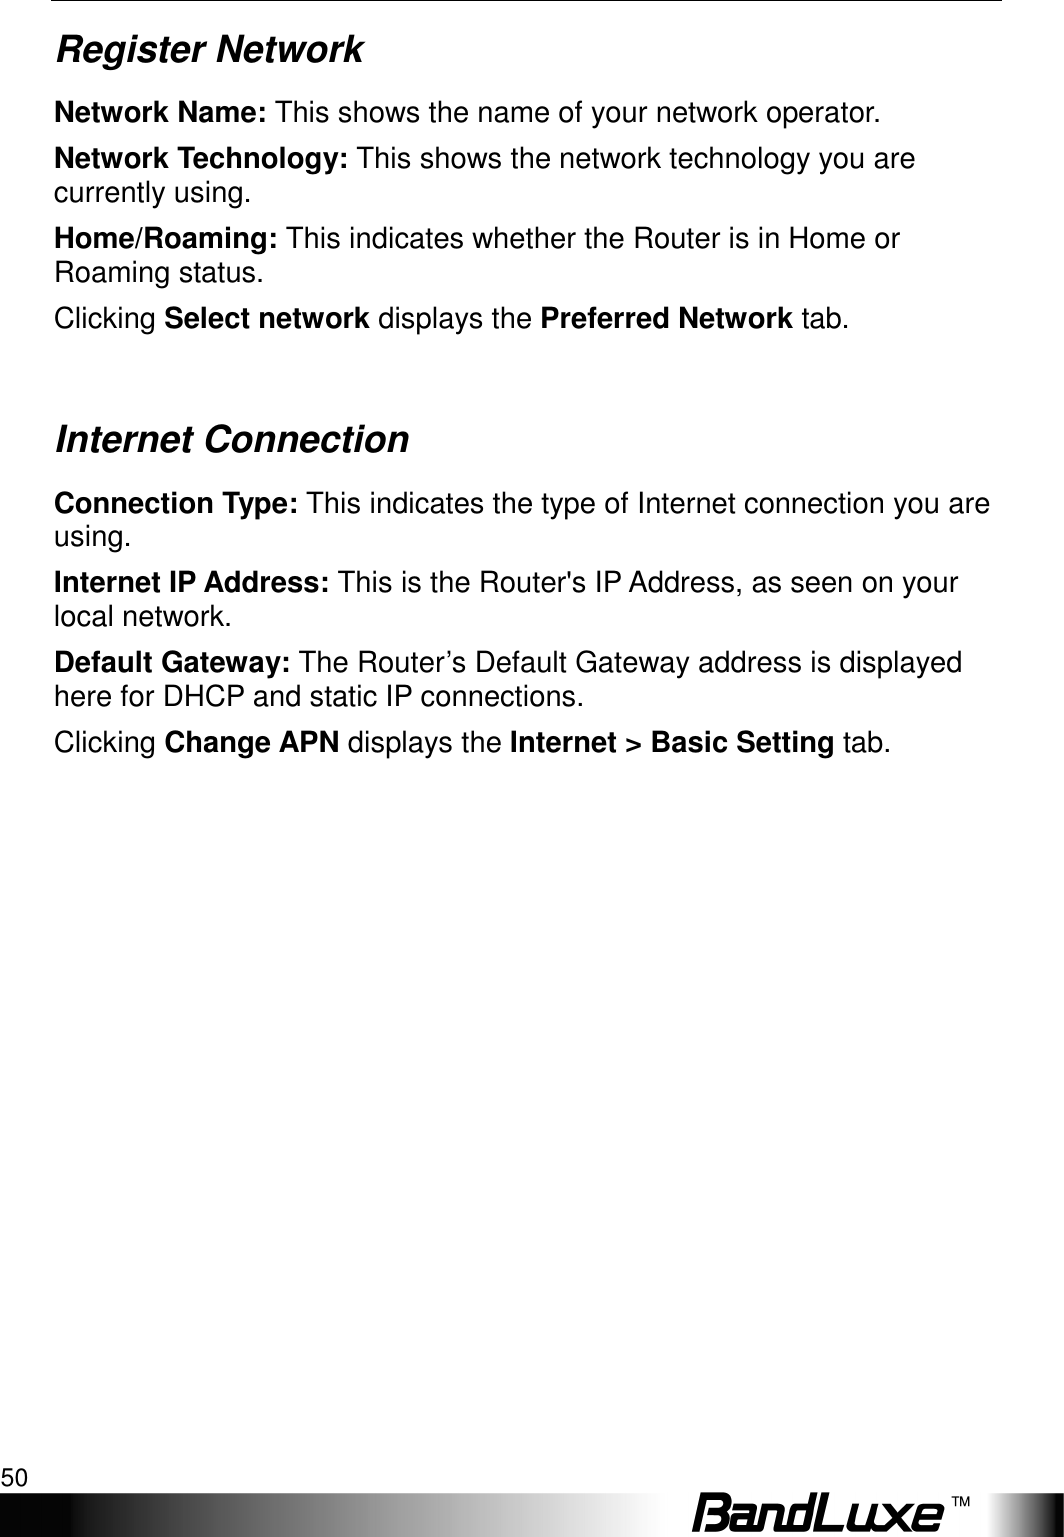 Status 50  Register Network Network Name: This shows the name of your network operator. Network Technology: This shows the network technology you are currently using. Home/Roaming: This indicates whether the Router is in Home or Roaming status. Clicking Select network displays the Preferred Network tab.  Internet Connection Connection Type: This indicates the type of Internet connection you are using. Internet IP Address: This is the Router&apos;s IP Address, as seen on your local network. Default Gateway: The Router’s Default Gateway address is displayed here for DHCP and static IP connections. Clicking Change APN displays the Internet &gt; Basic Setting tab. 